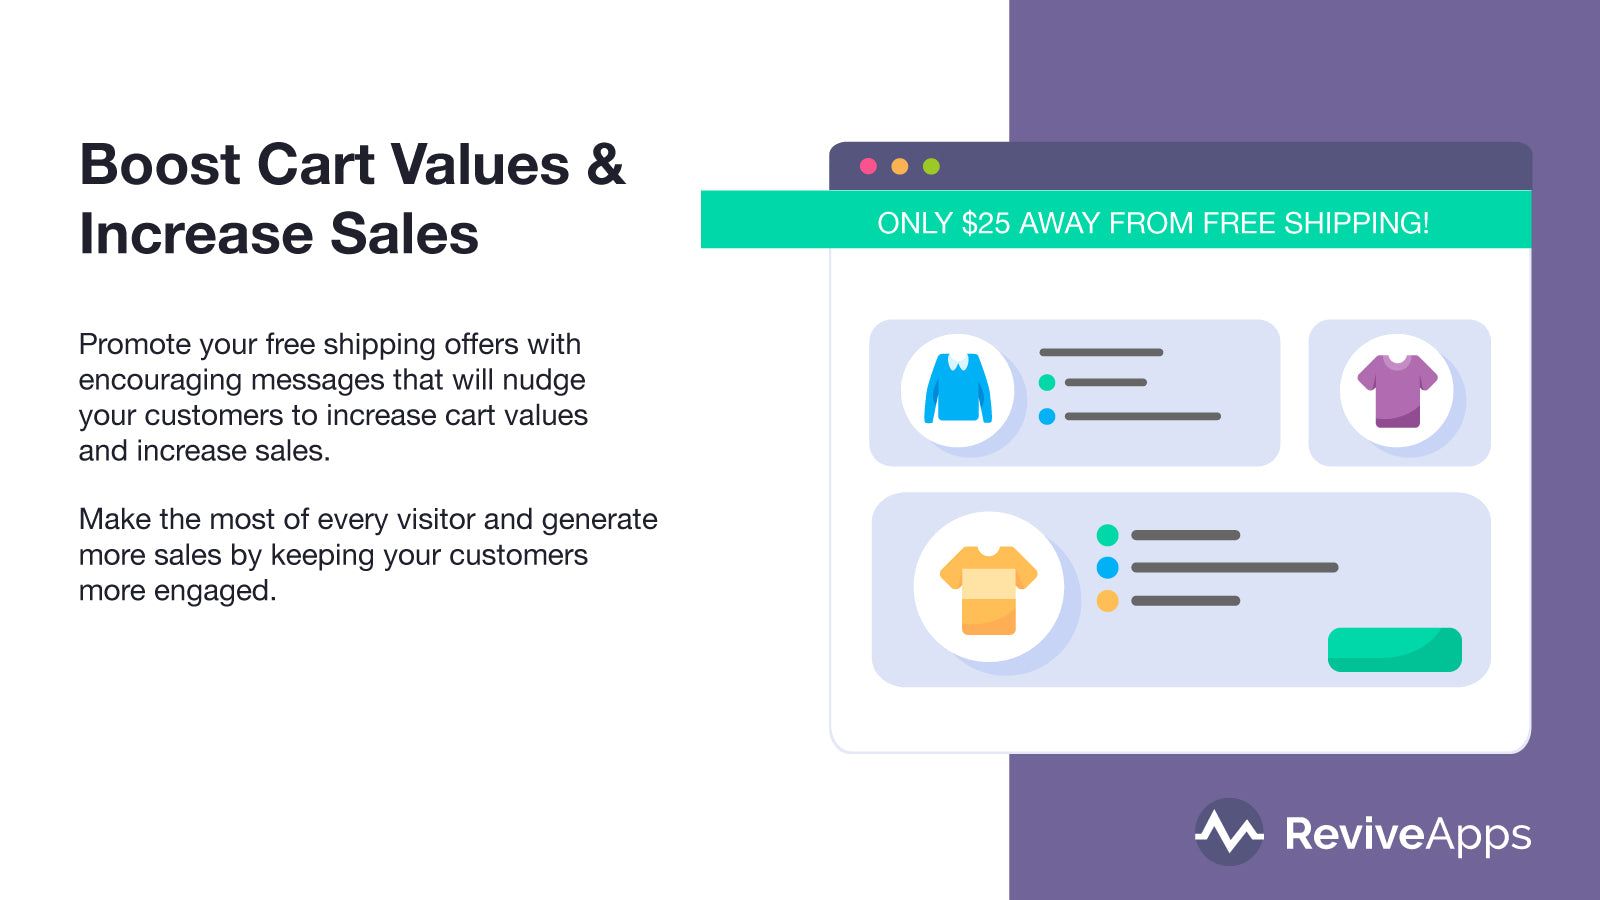 Boost cart values and increase sales